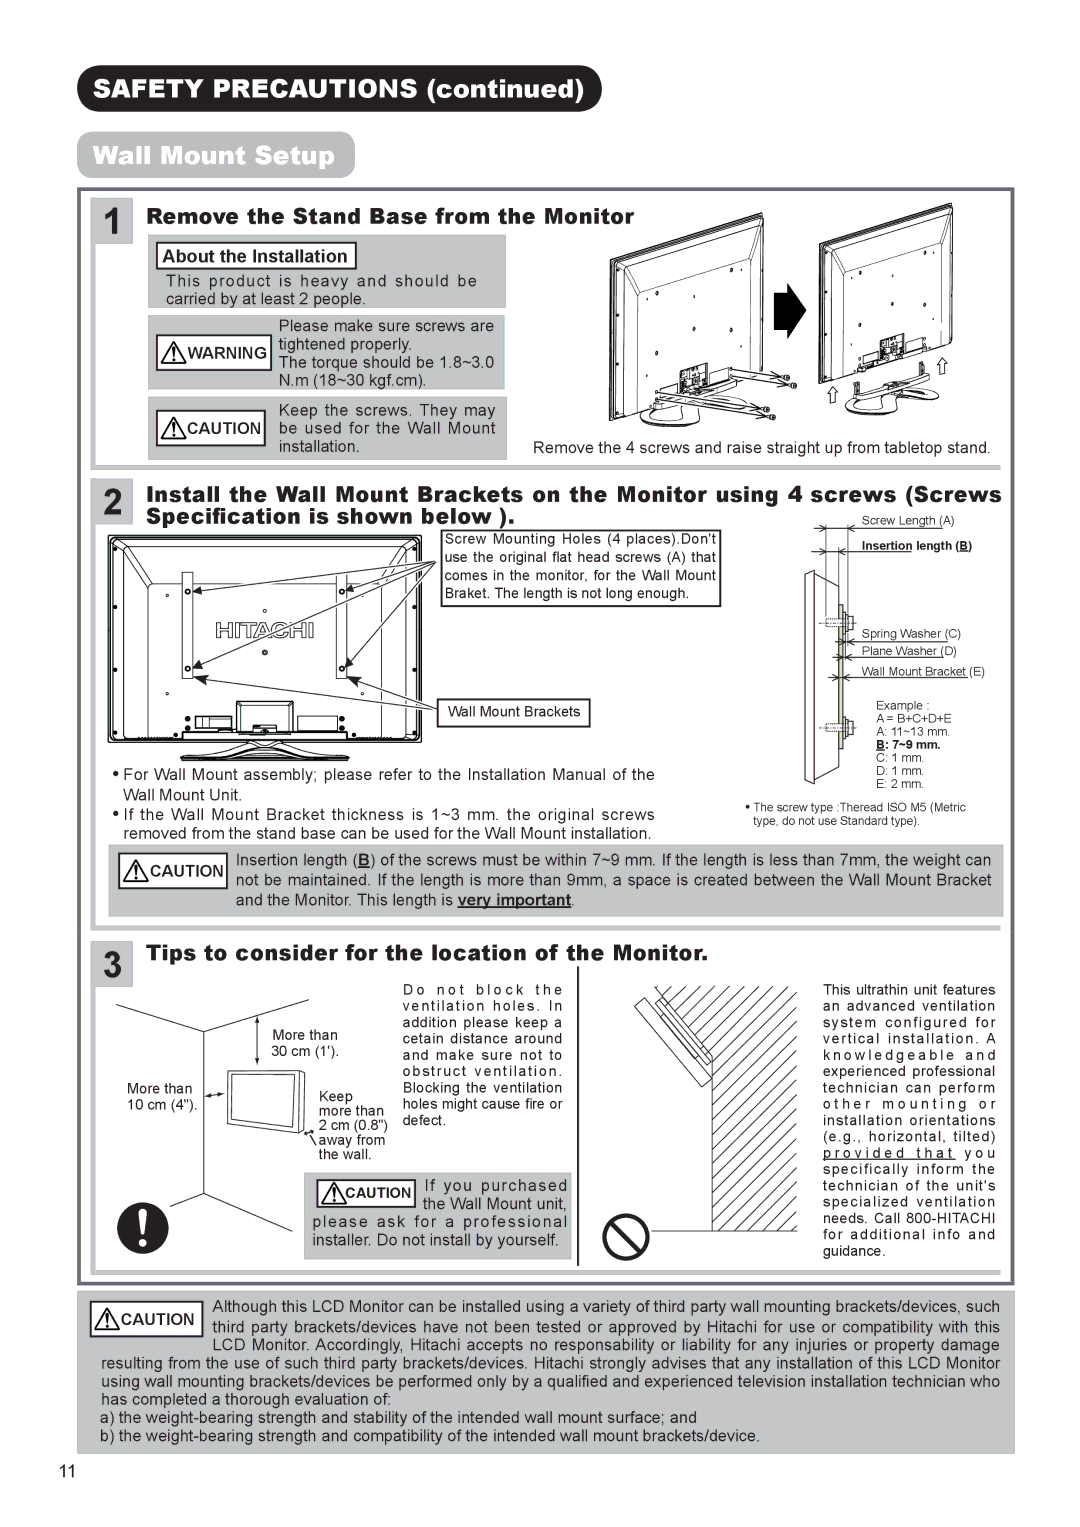 Hitachi UT32X802 Safety Precautions Wall Mount Setup, Remove the Stand Base from the Monitor, Specification is shown below 